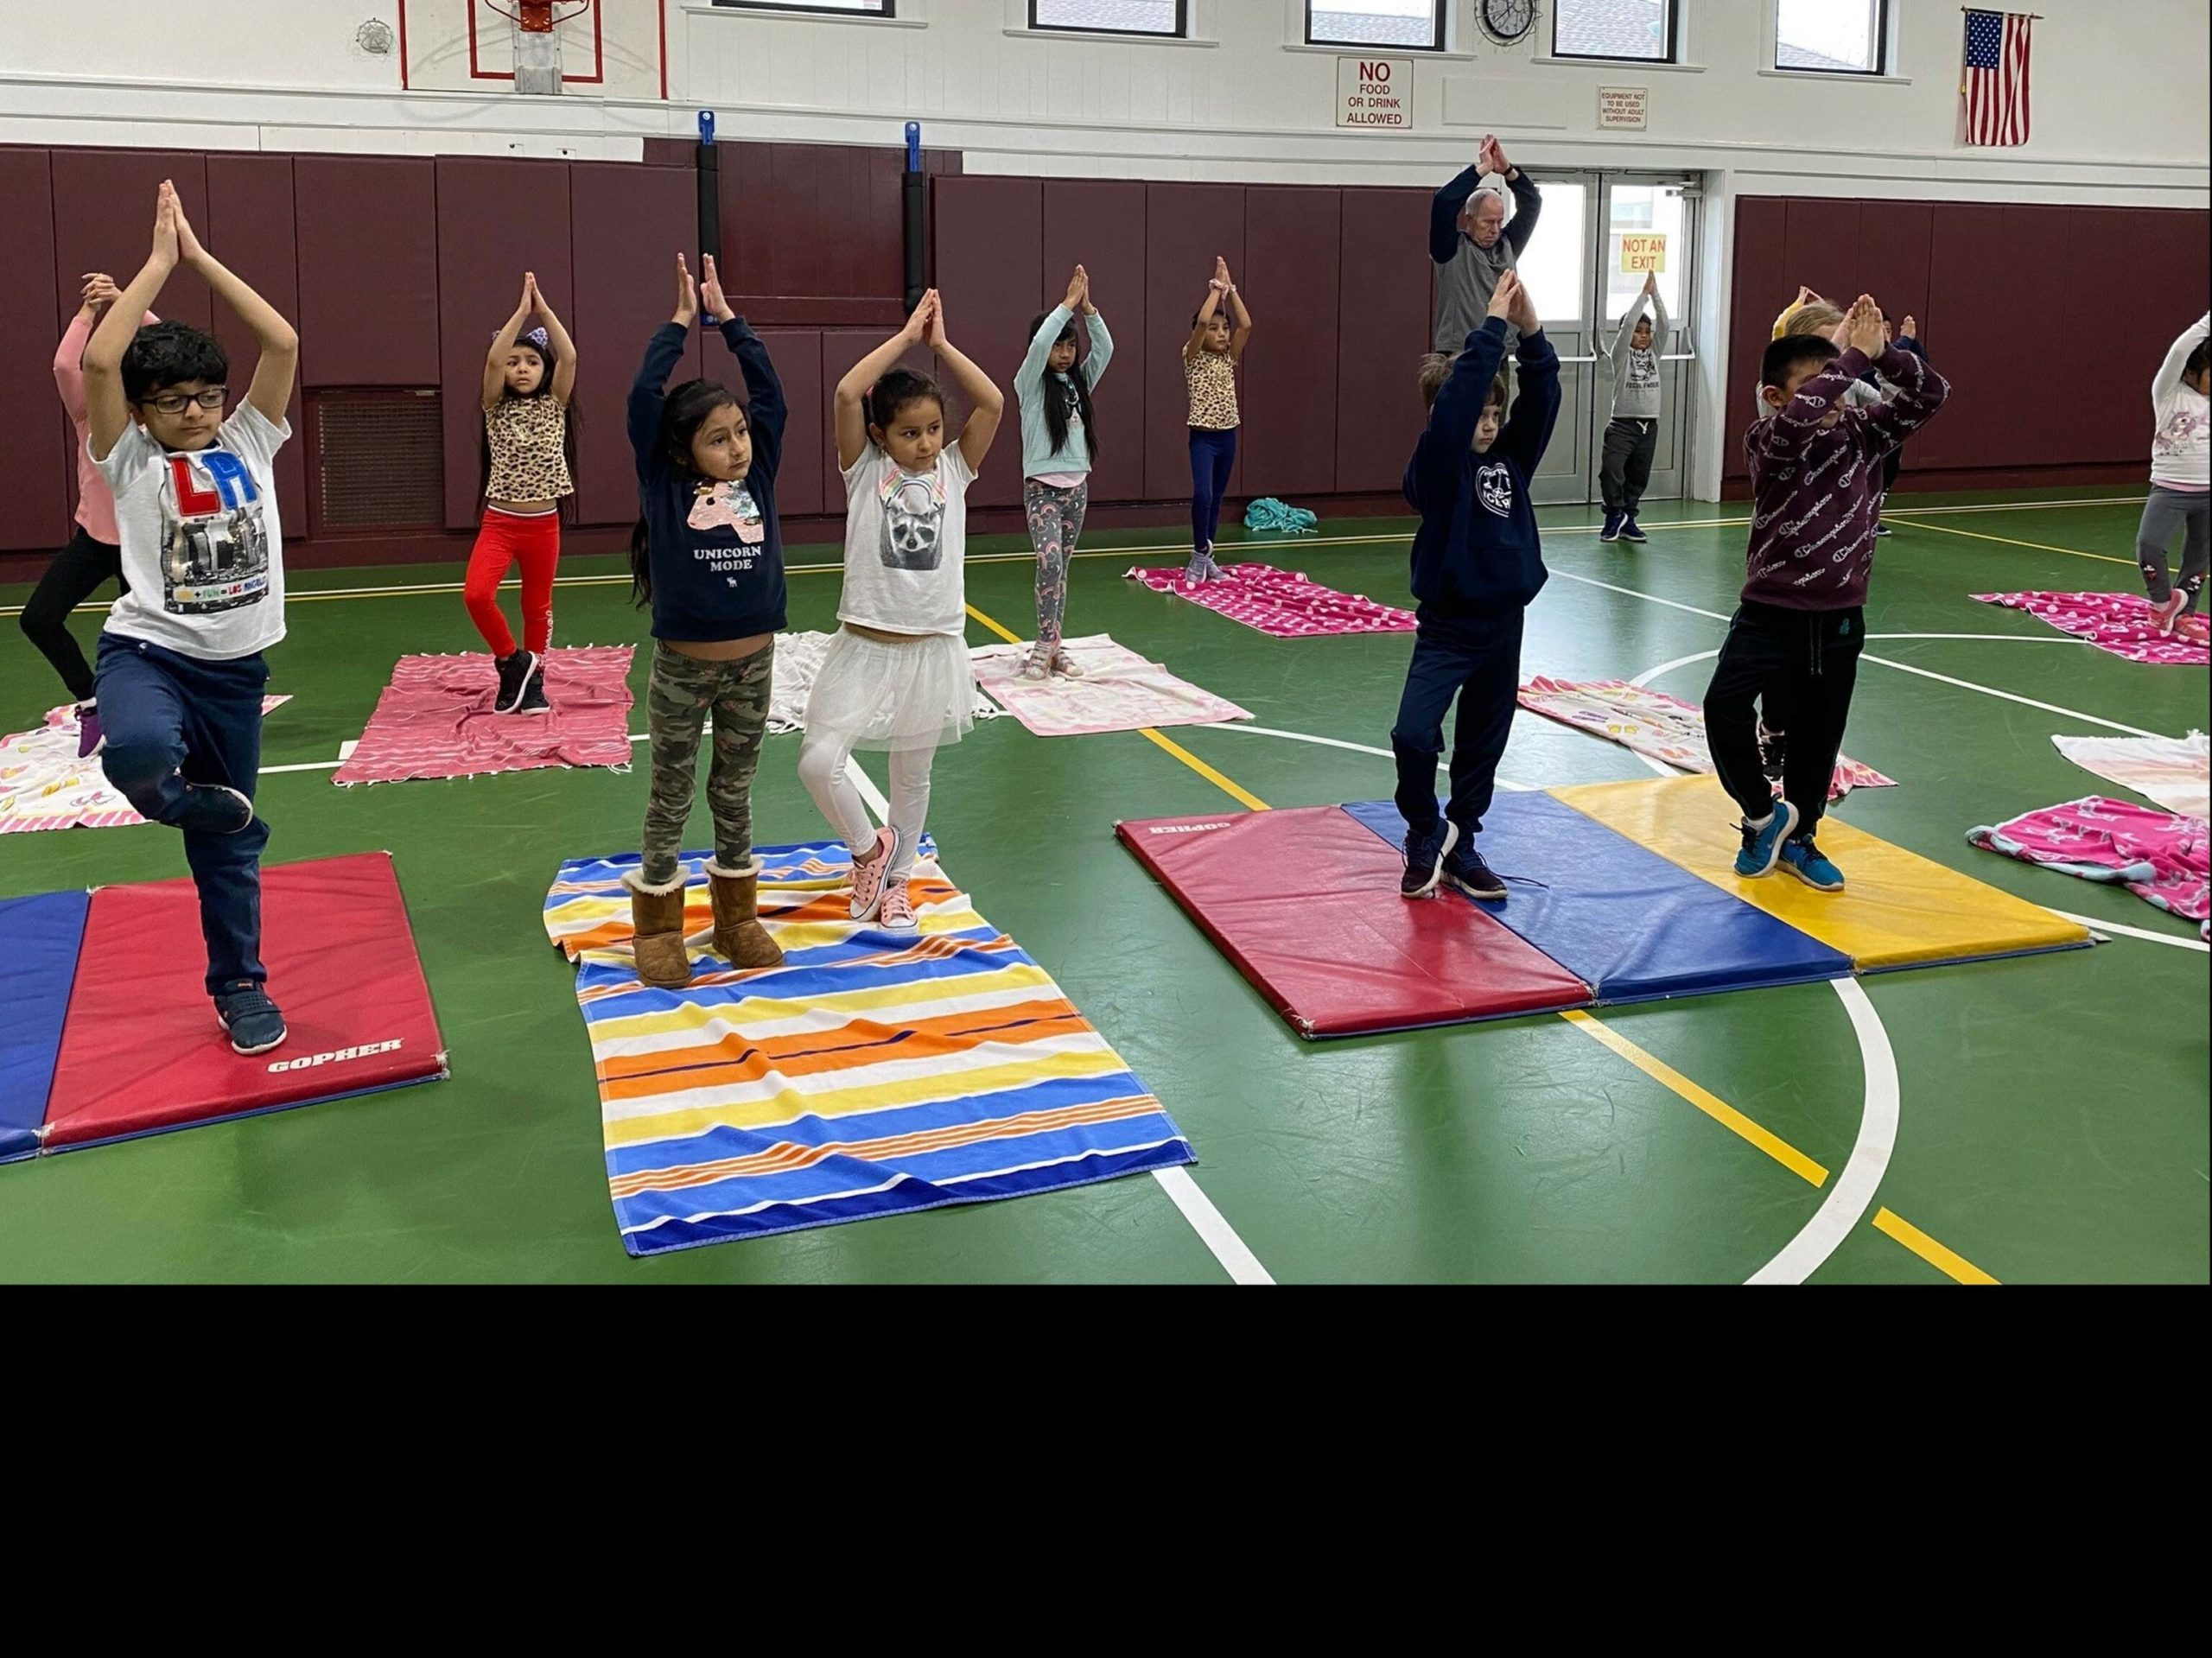 The Tuckahoe Educational Foundation and the Tuckahoe PTO funded four days of yoga for all students at Tuckahoe School. Under the guidance of Angela Polchinski and Marcus Lapianna, the students learned how to use their breath to help them relax in difficult situations, and learned balance techniques and stretches. 